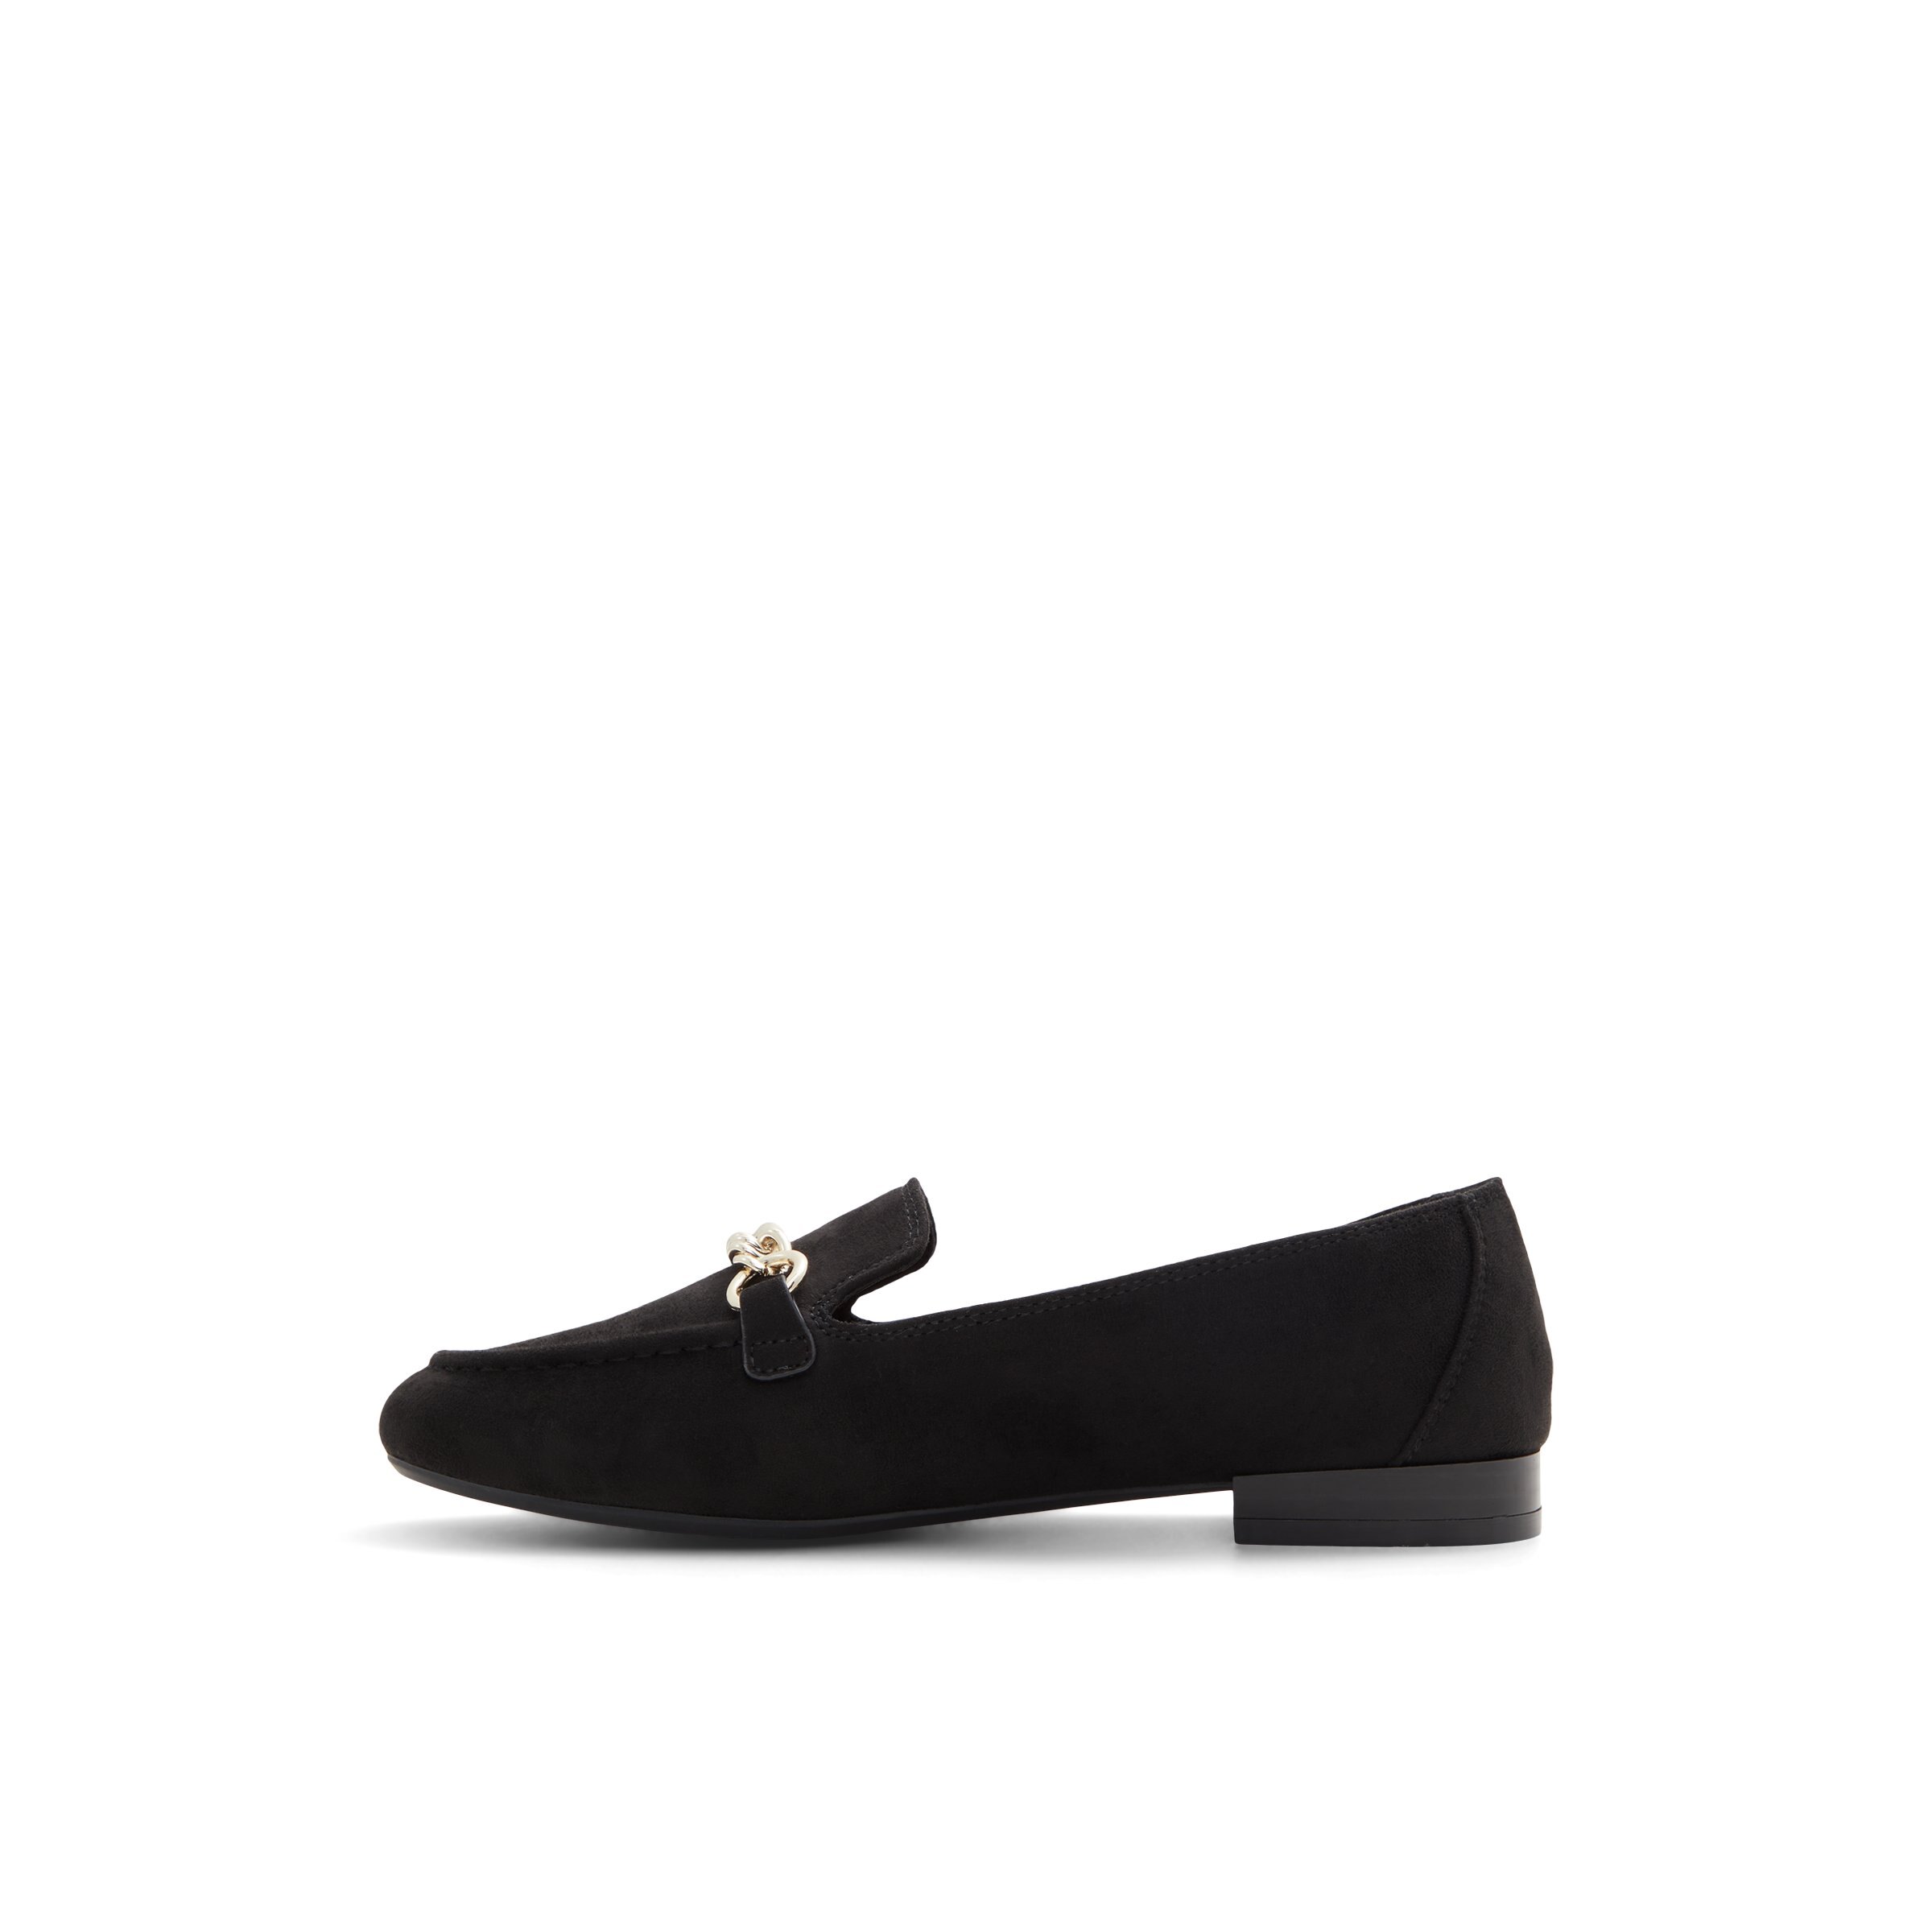 Norah Black Women's Loafers | Call It Spring Canada